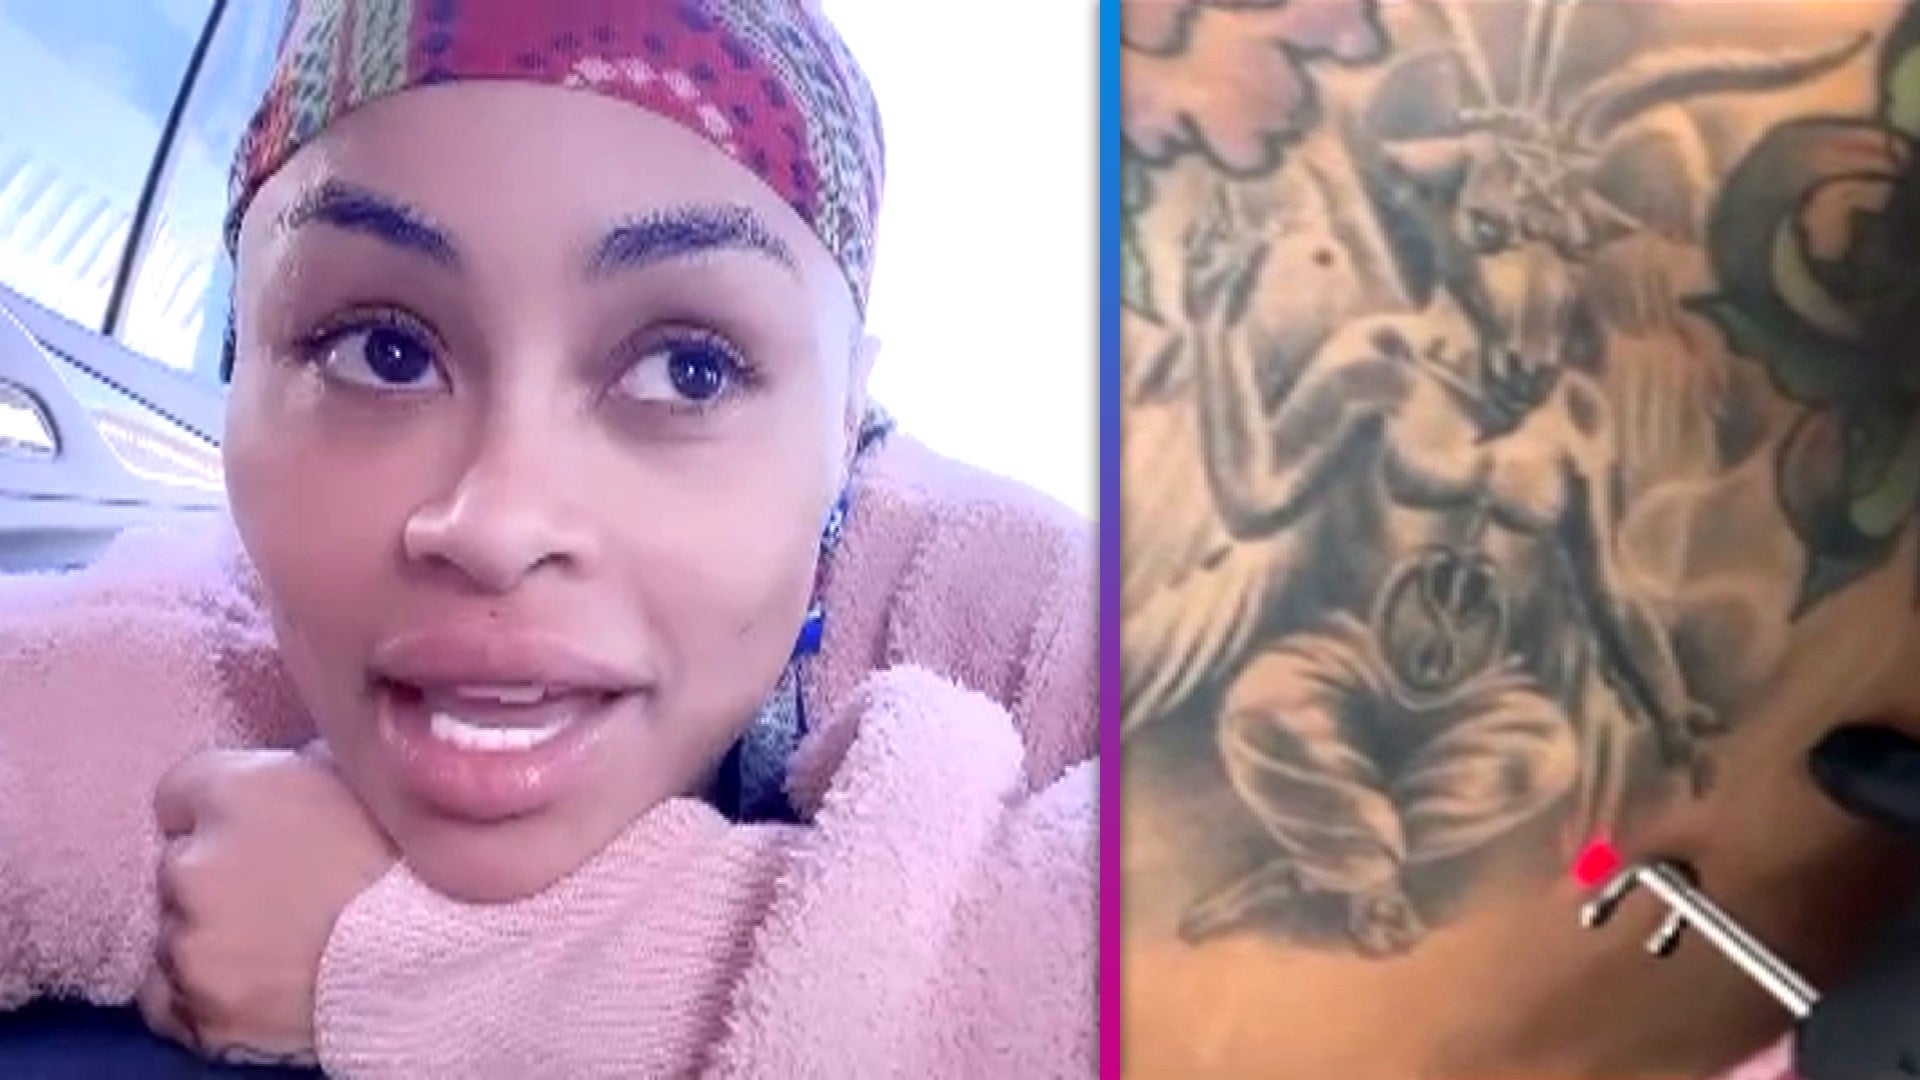 MASK OFF Blac Chyna Covers Up Future Tattoo With Daughters Name Dream   ItsKenBarbie